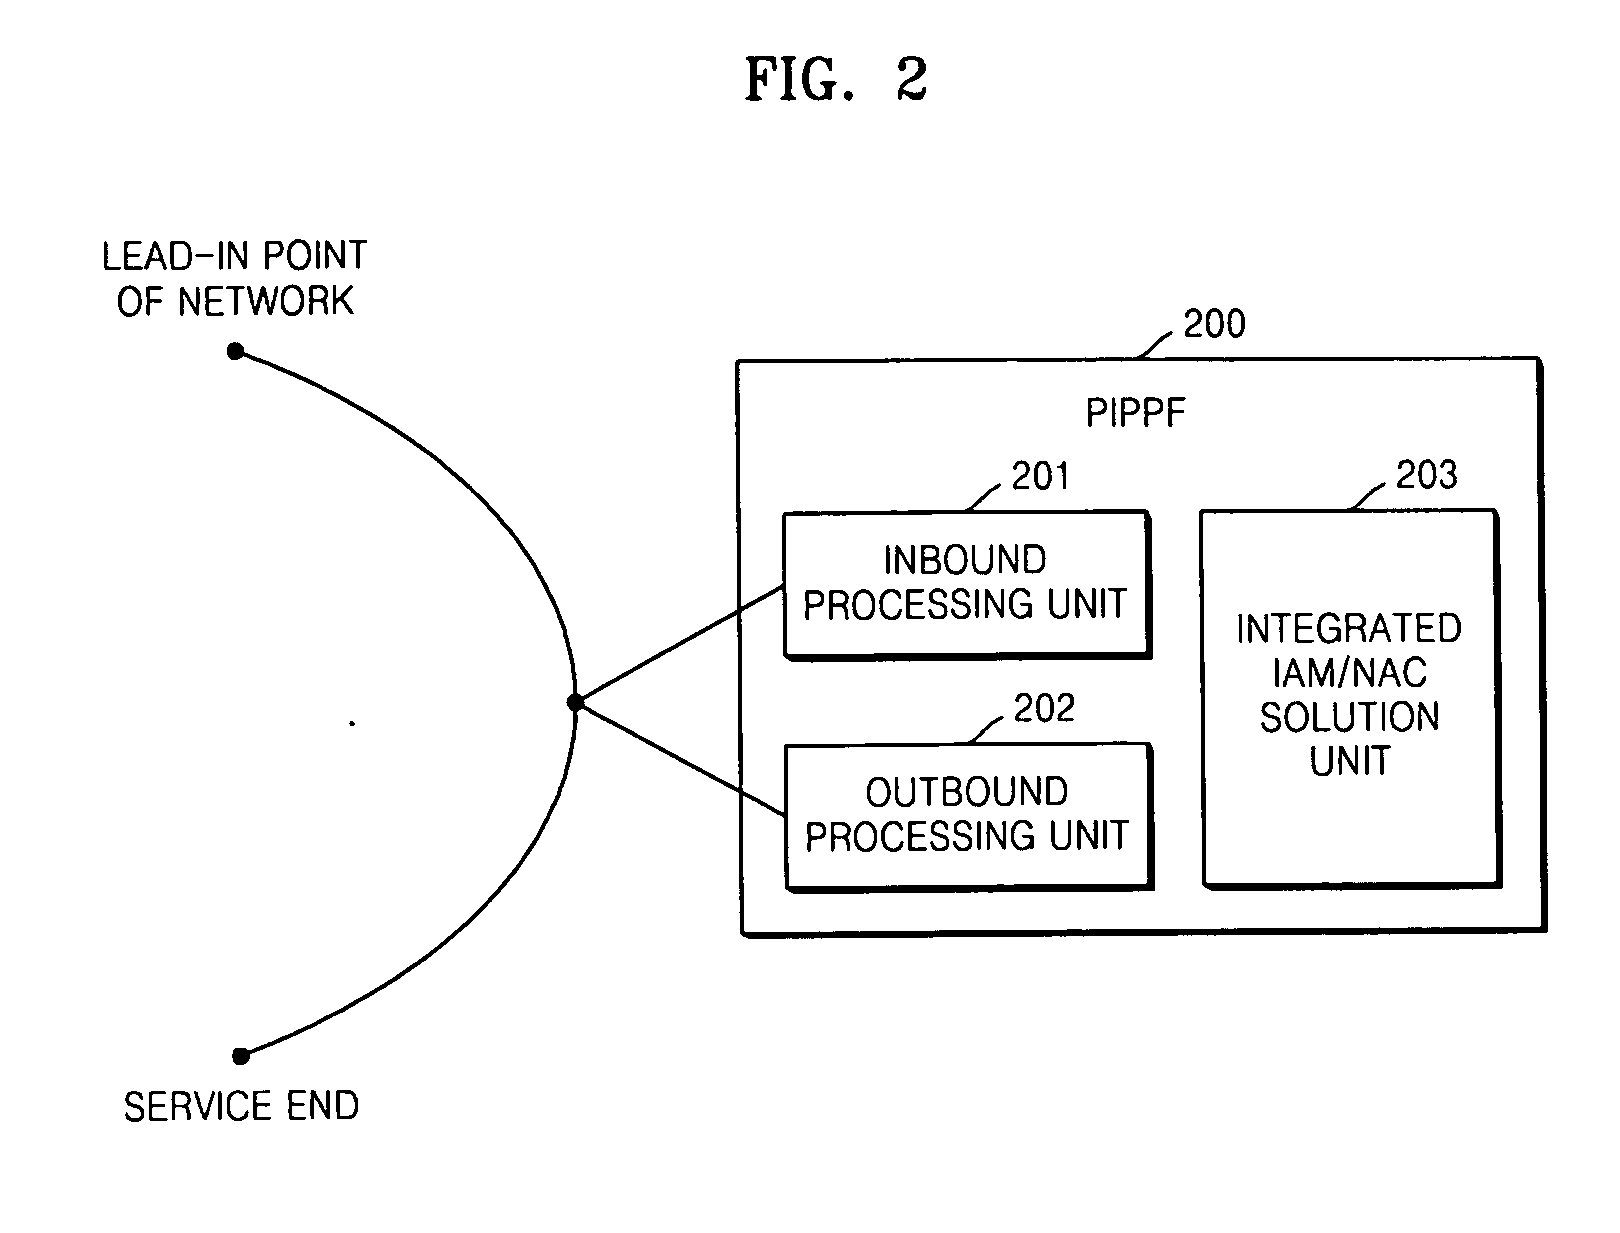 Apparatus and method of protecting user's privacy information and intellectual property against denial of information attack